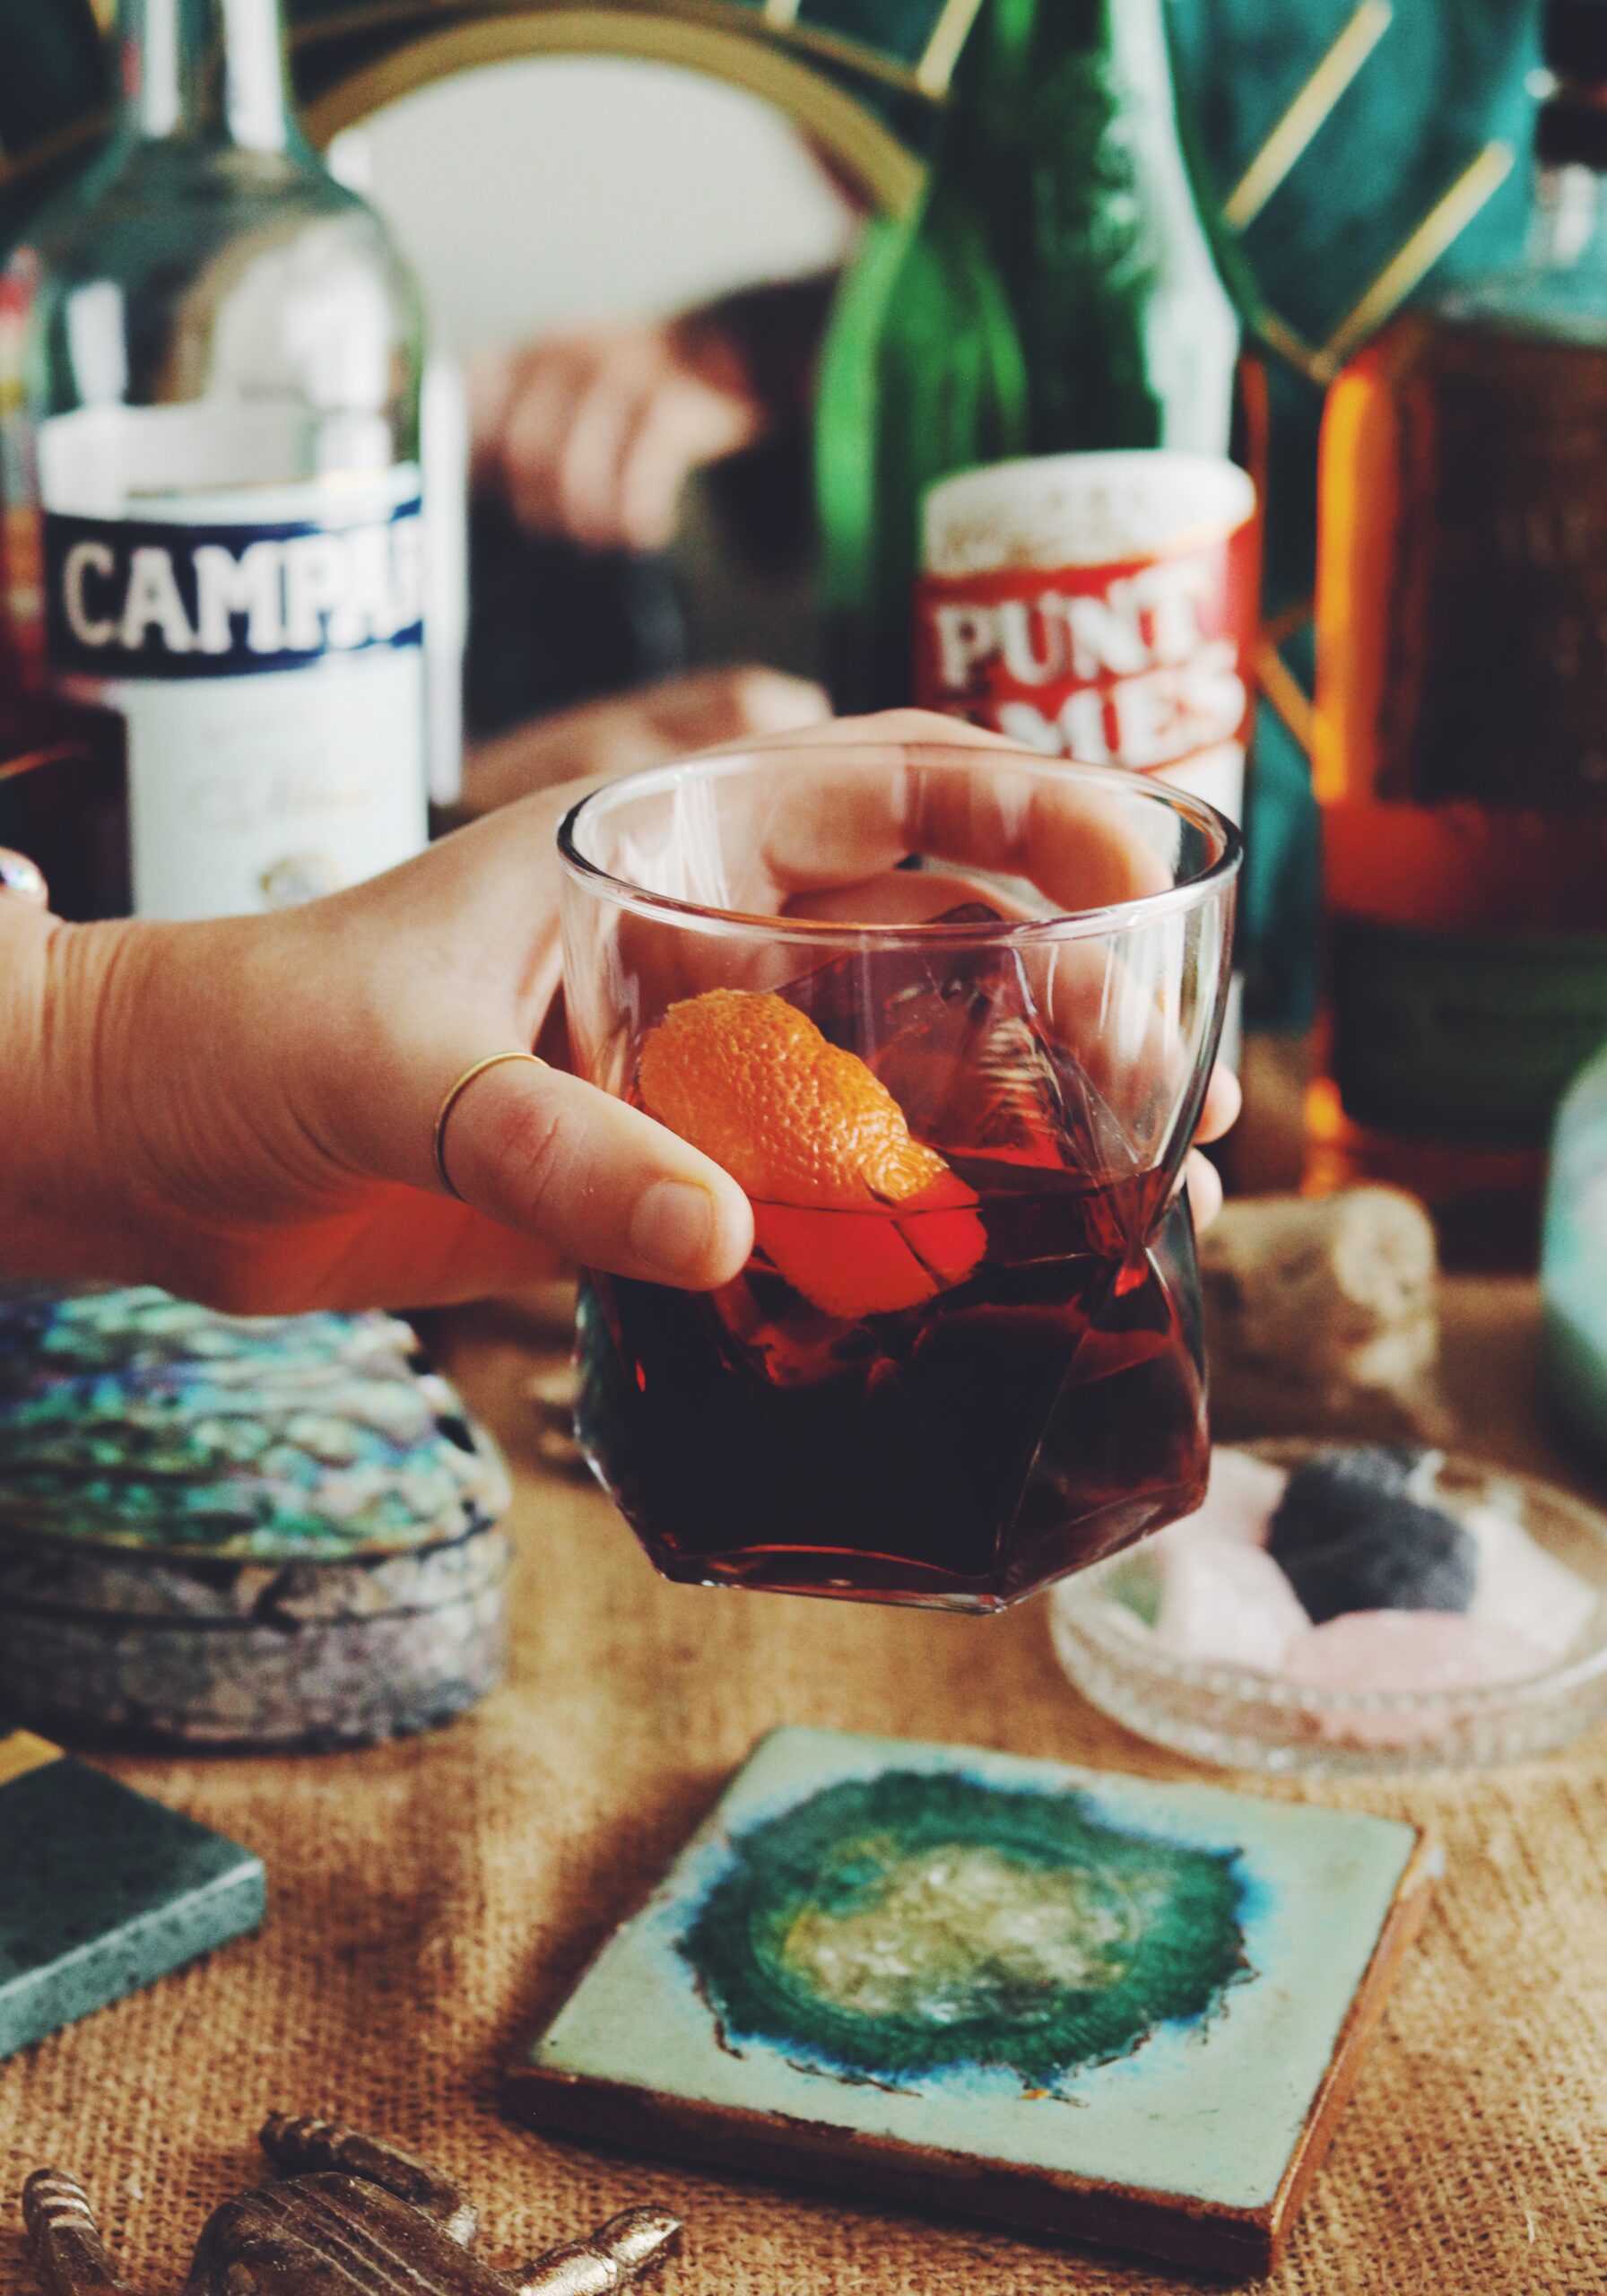 Boulevardier Cocktail Recipe - Pinch and Swirl